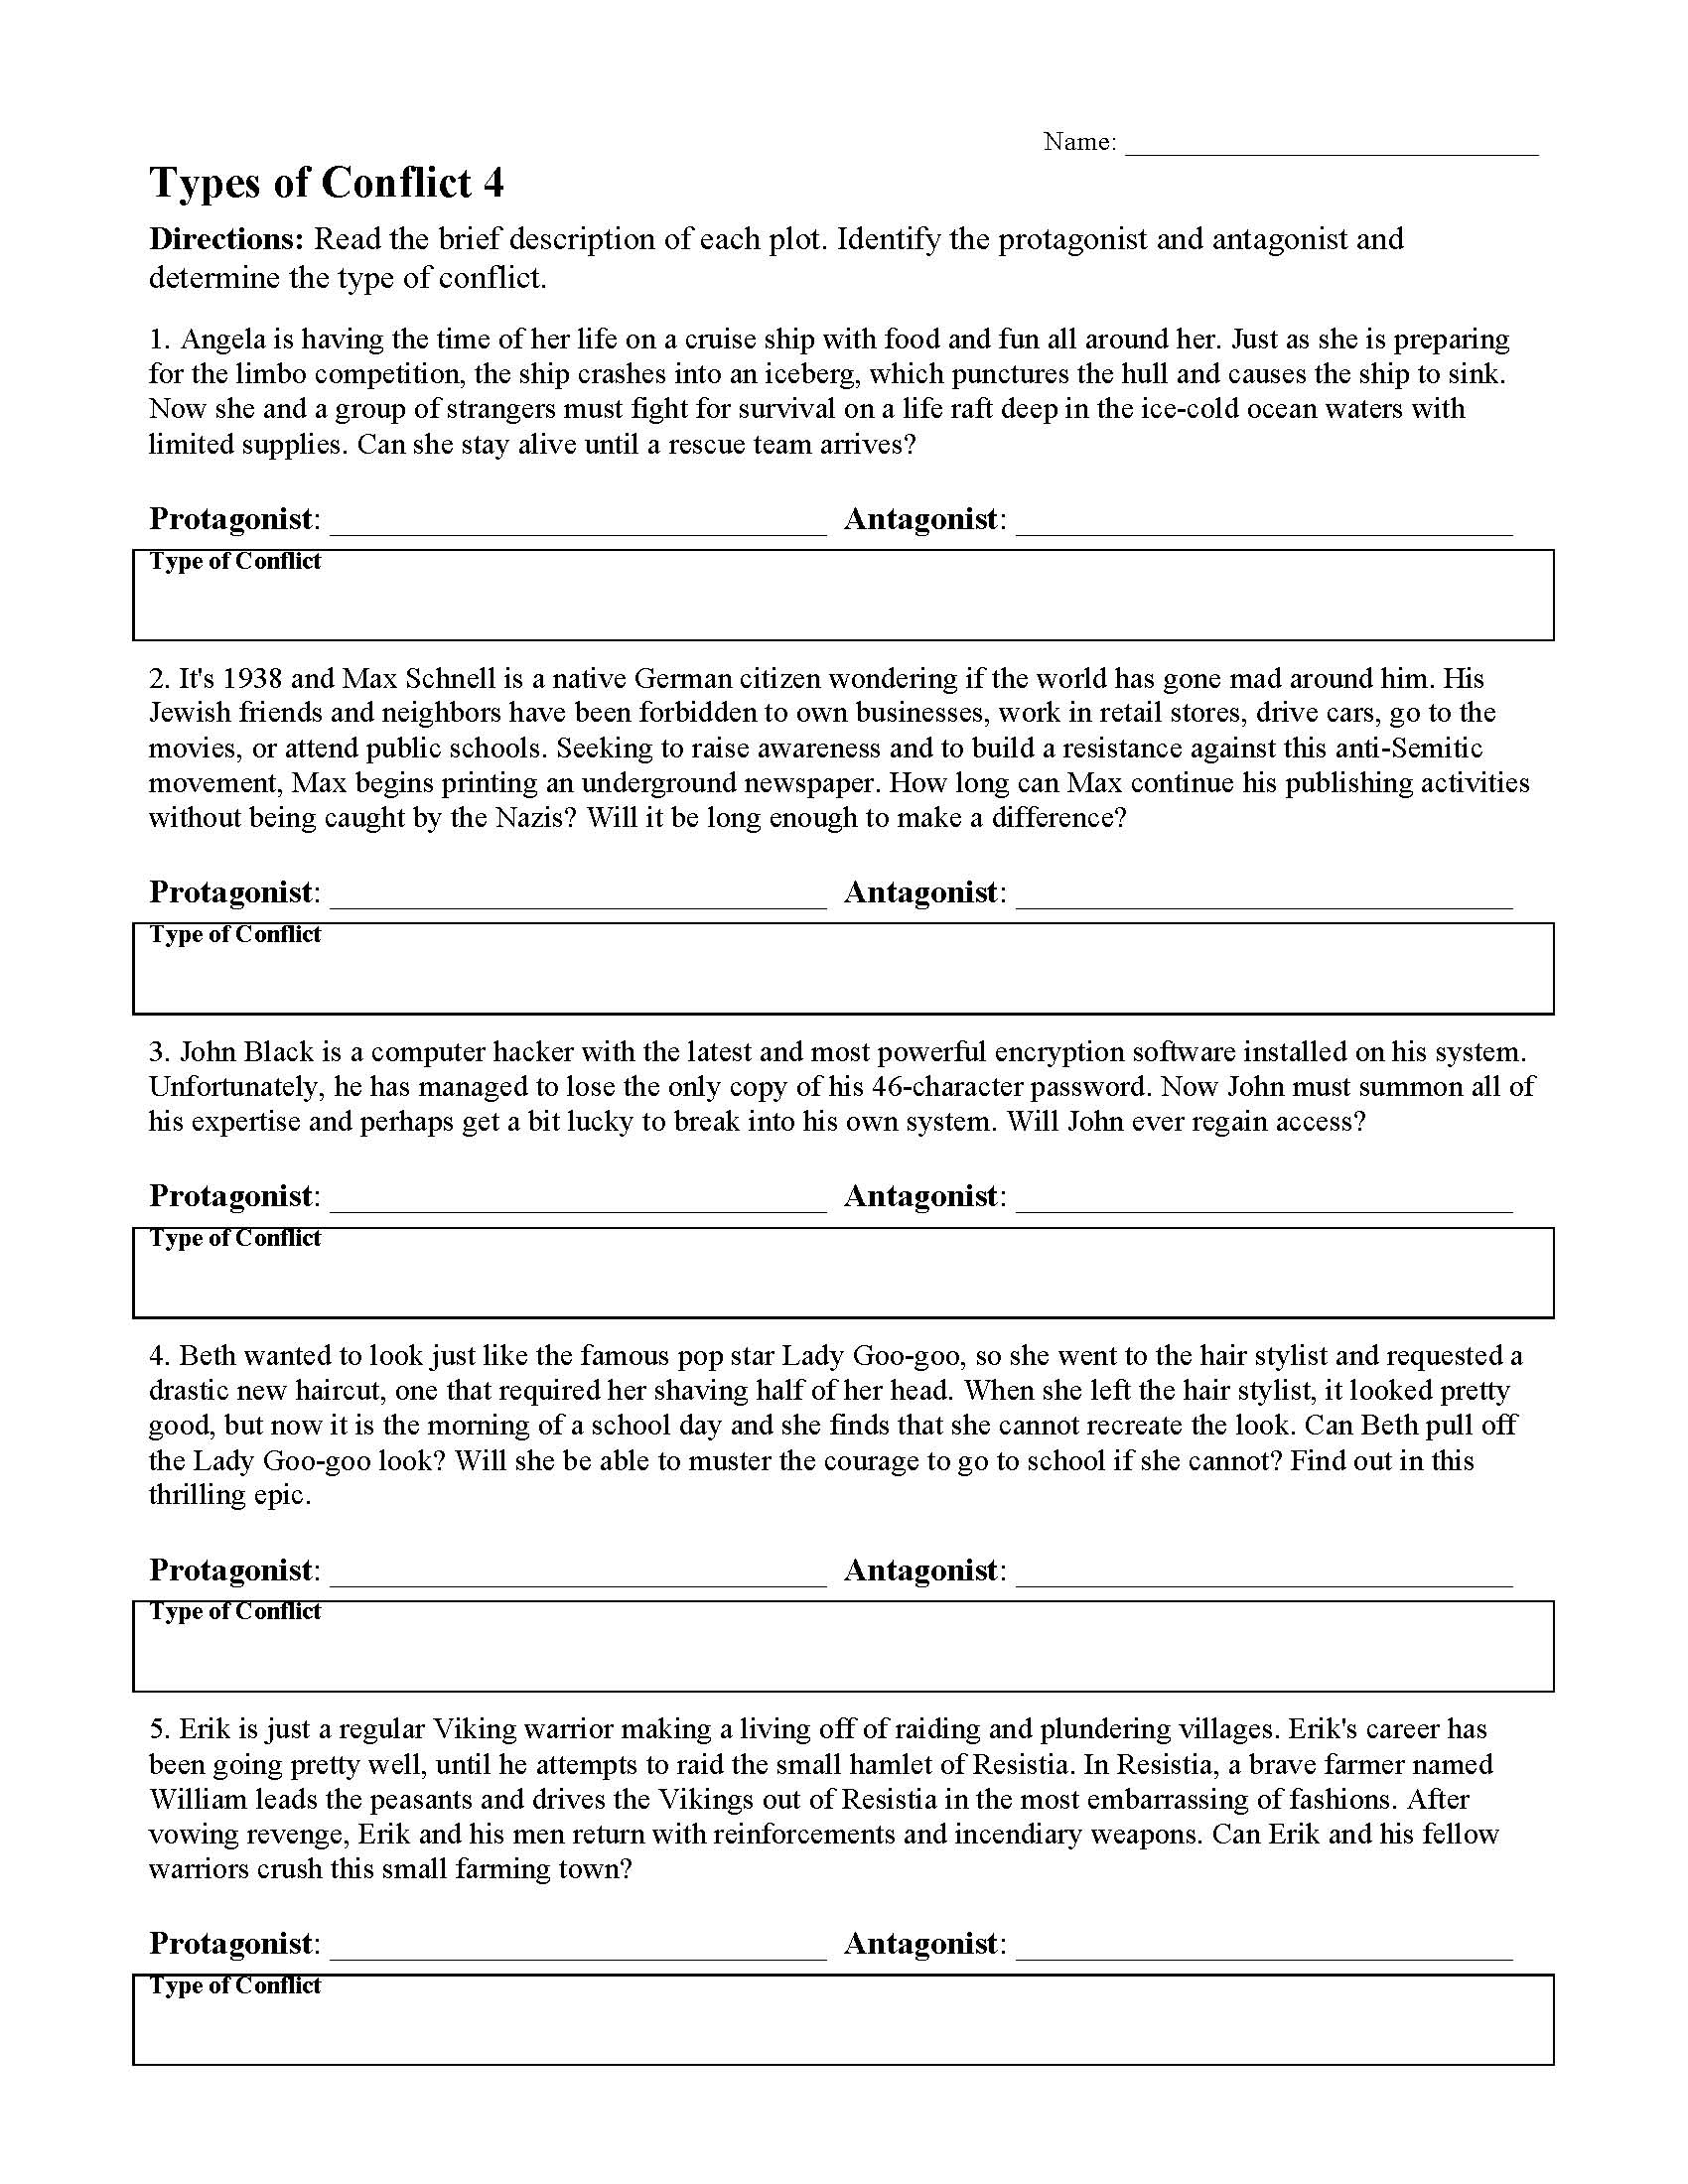 Types of Conflicts in Stories - Worksheets & Lessons  Ereading Intended For Types Of Conflict Worksheet